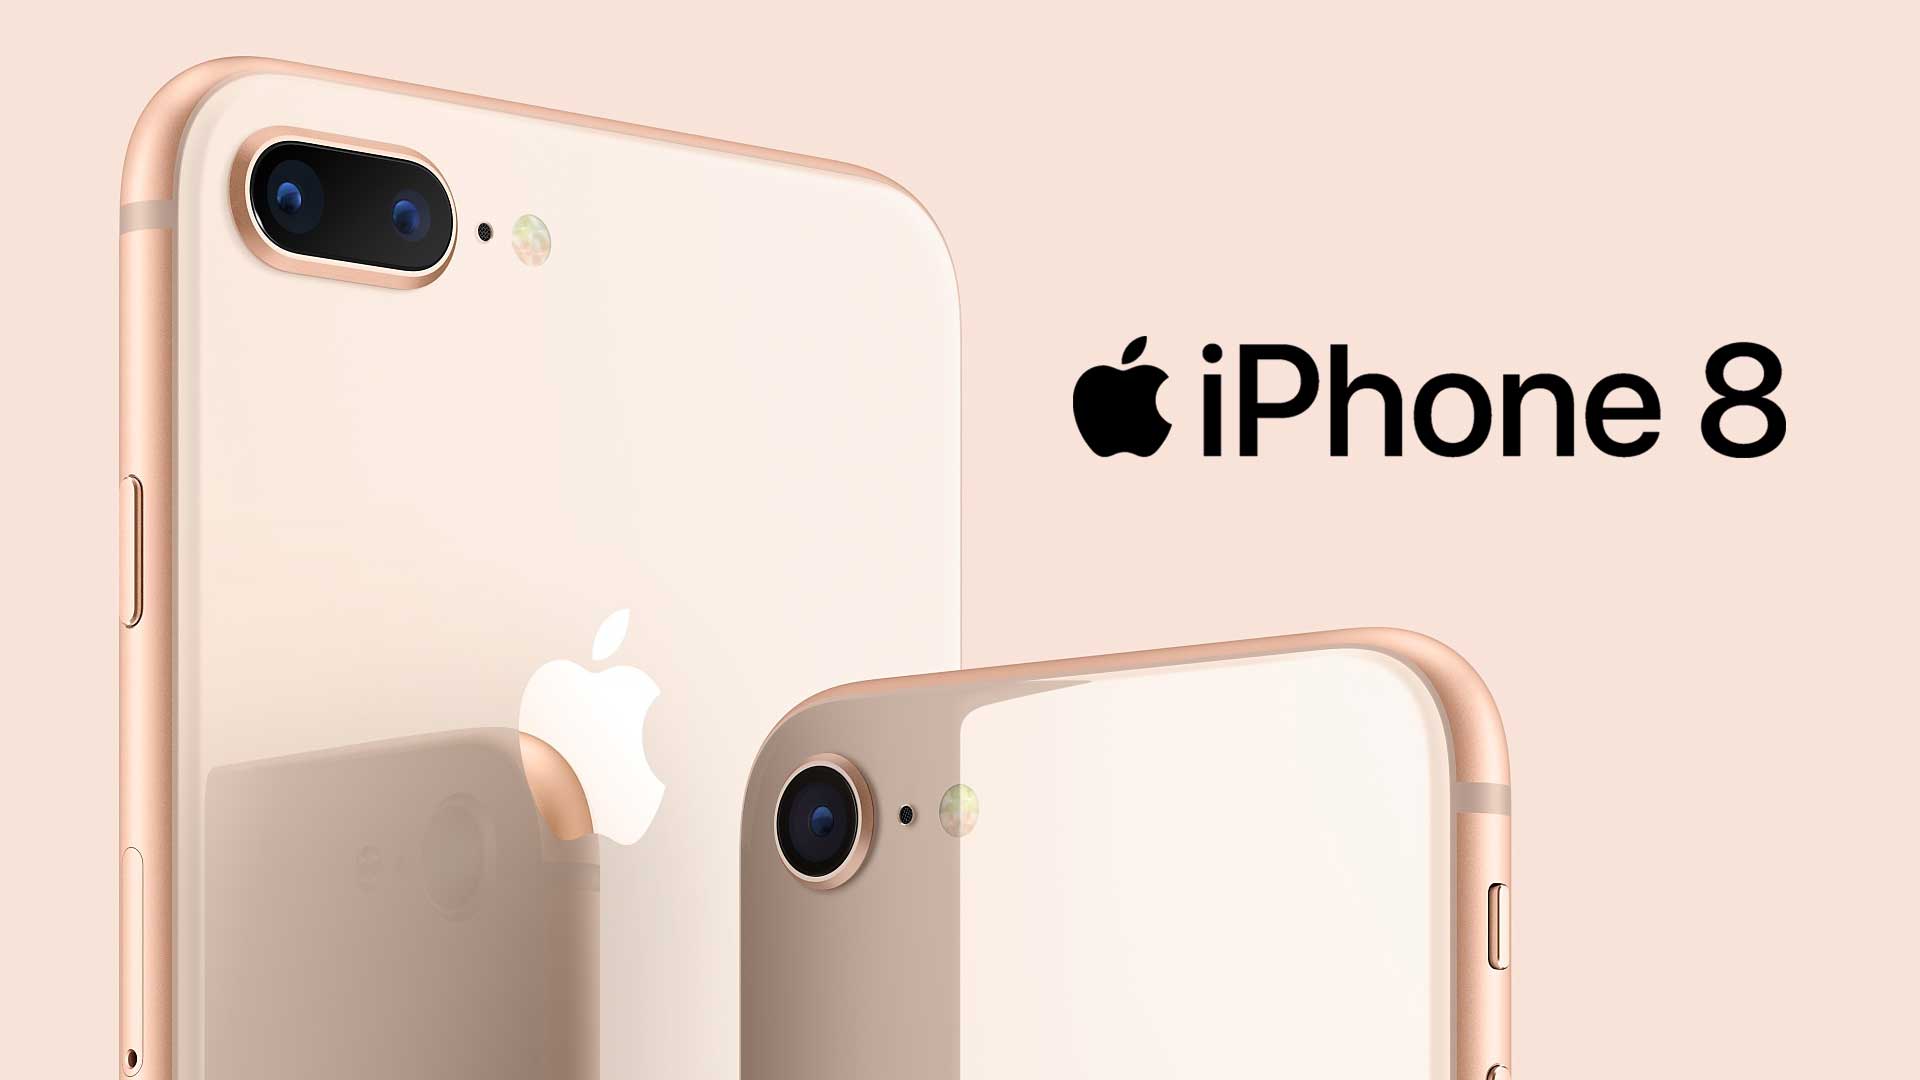 iPhone 8: The Only 3 New Features You Need To Care About